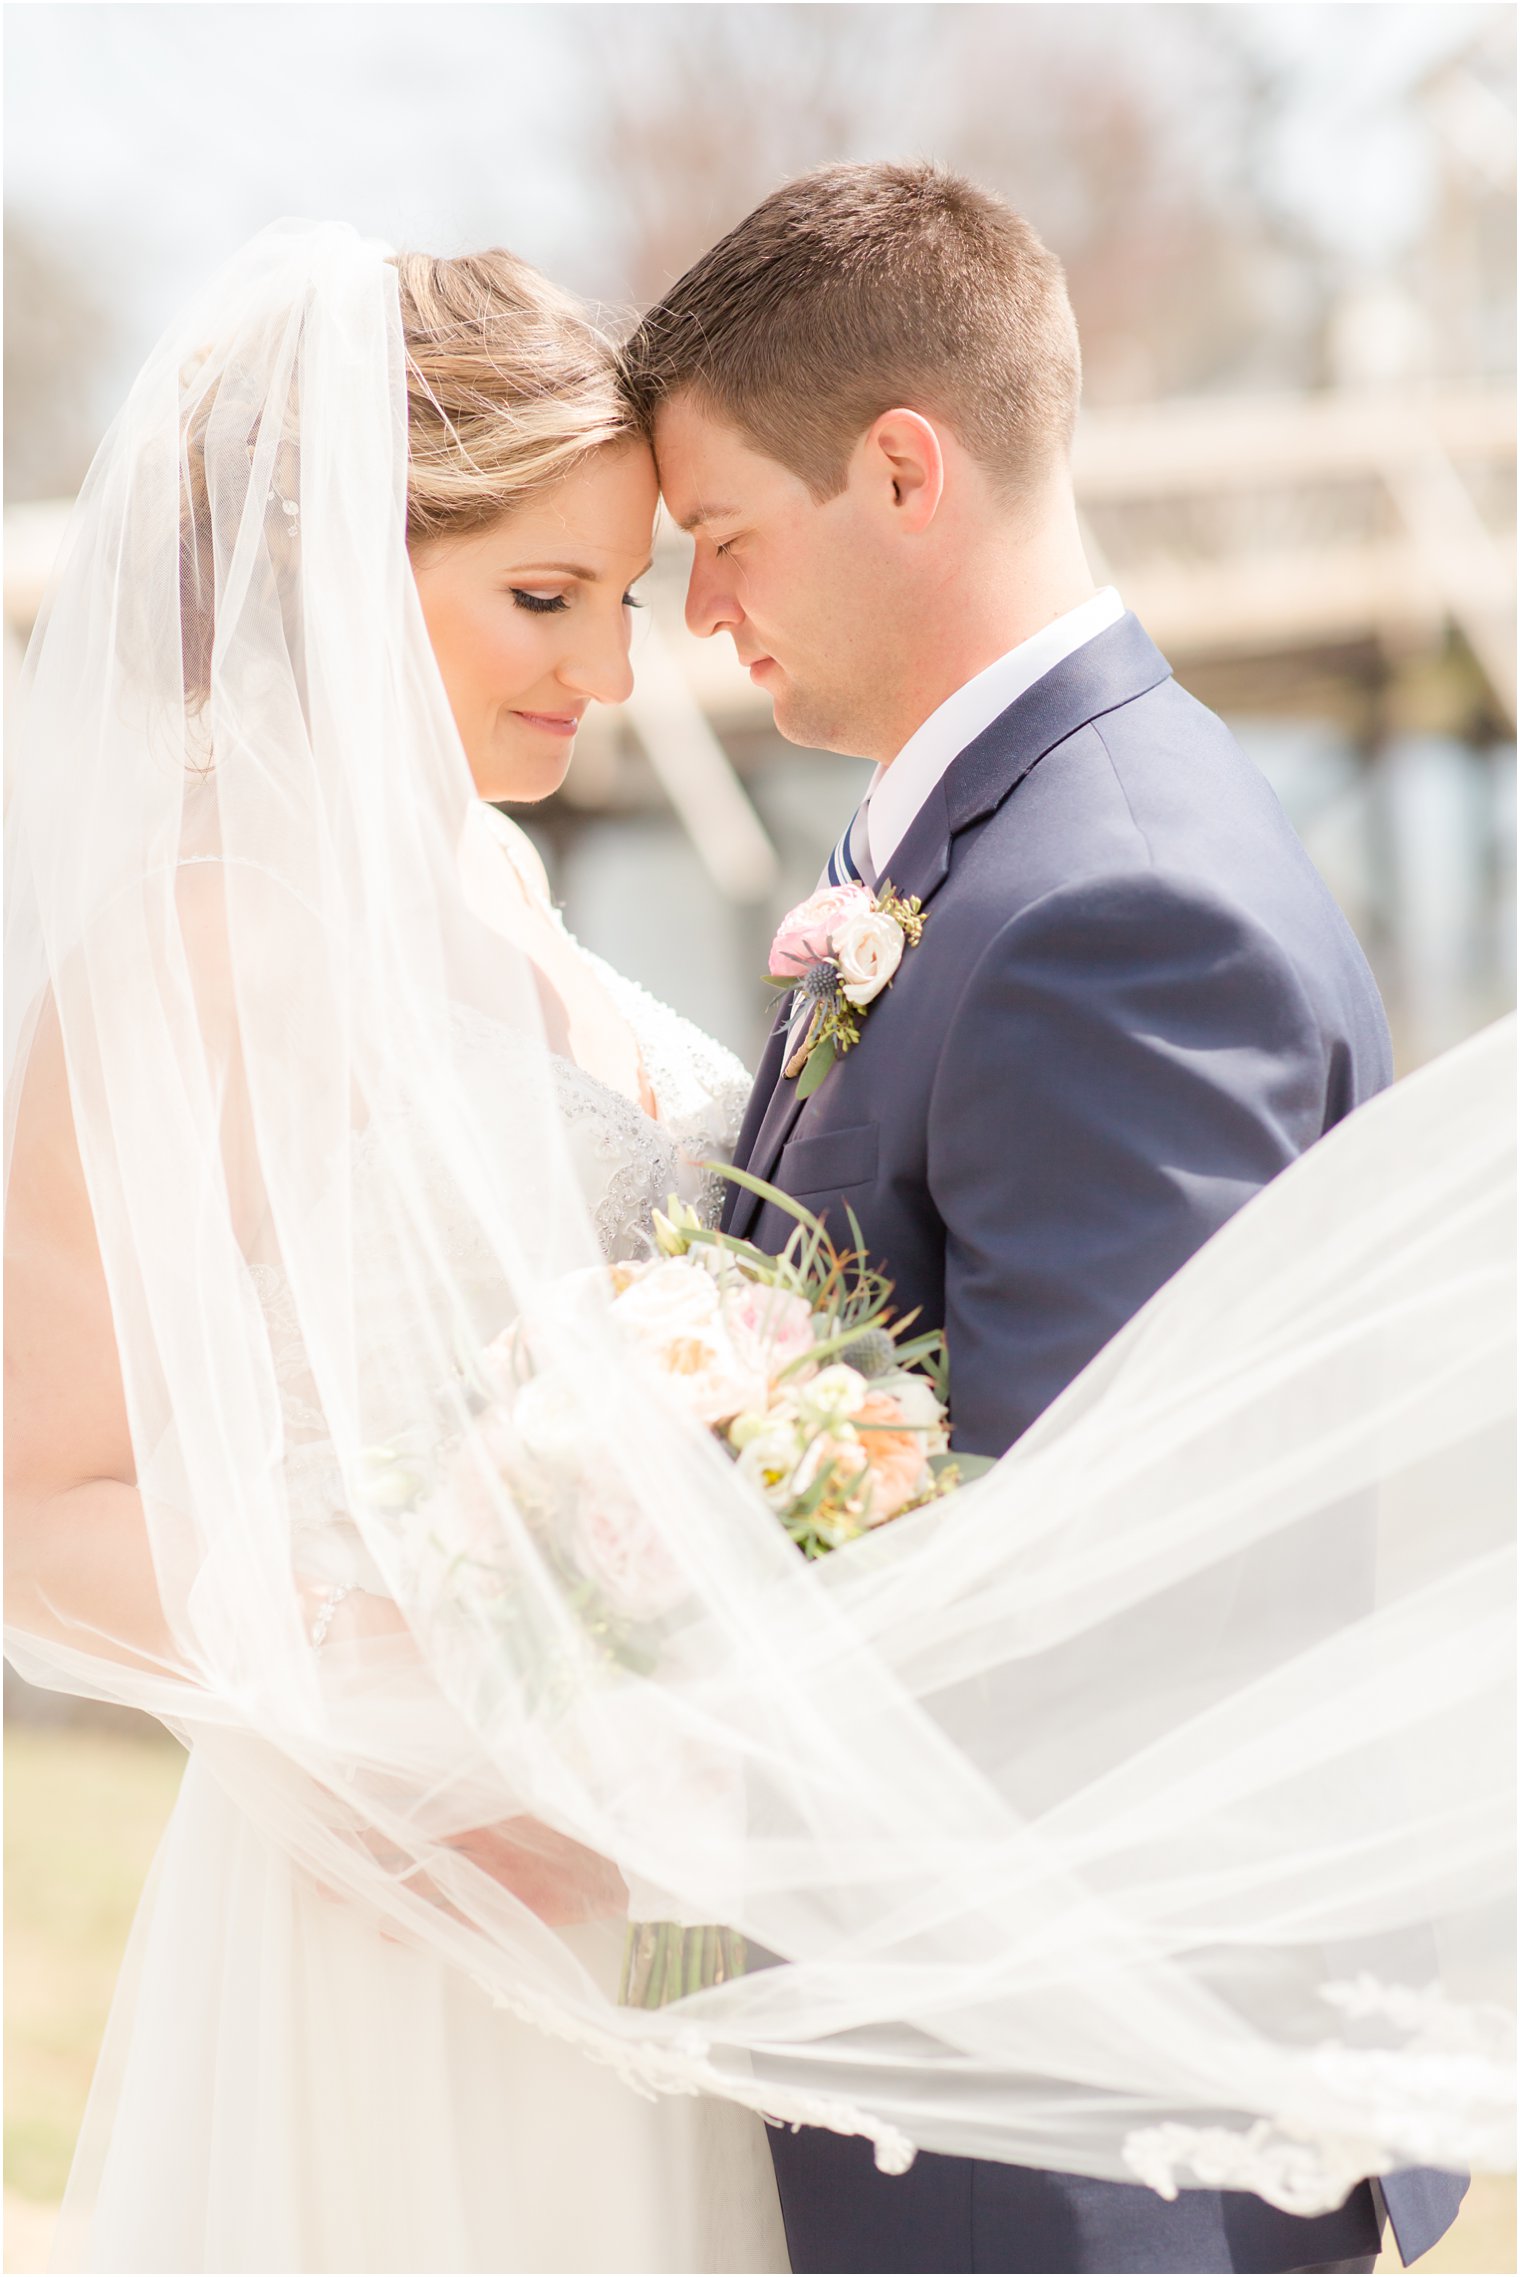 Romantic photo of bride and groom with wind blown veil 